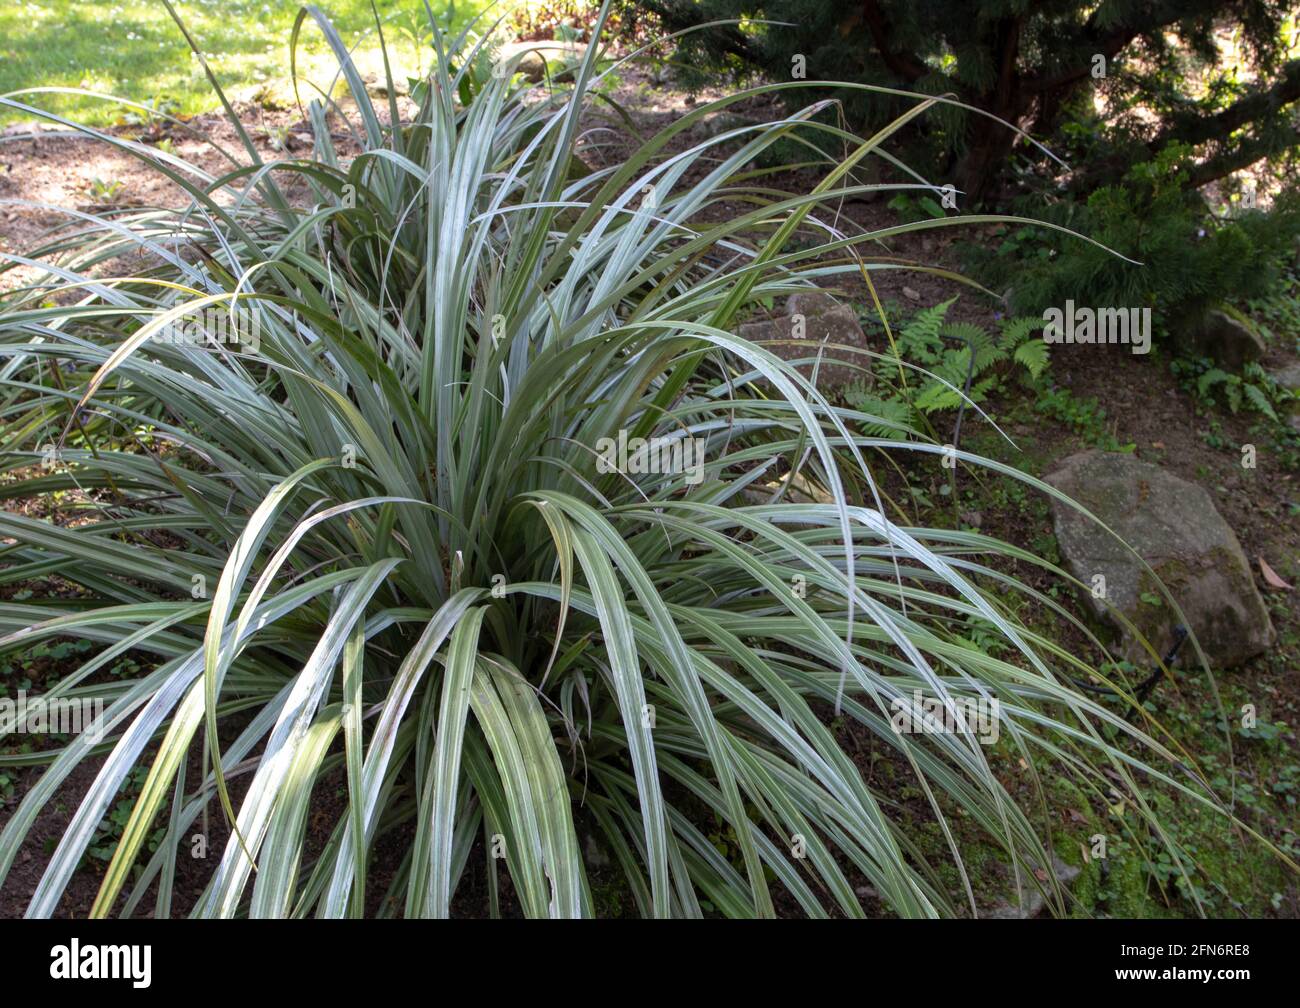 Astelia chathamica, the Chatham Islands kakaha, Maori flax, or silver spear plant in the garden Stock Photo